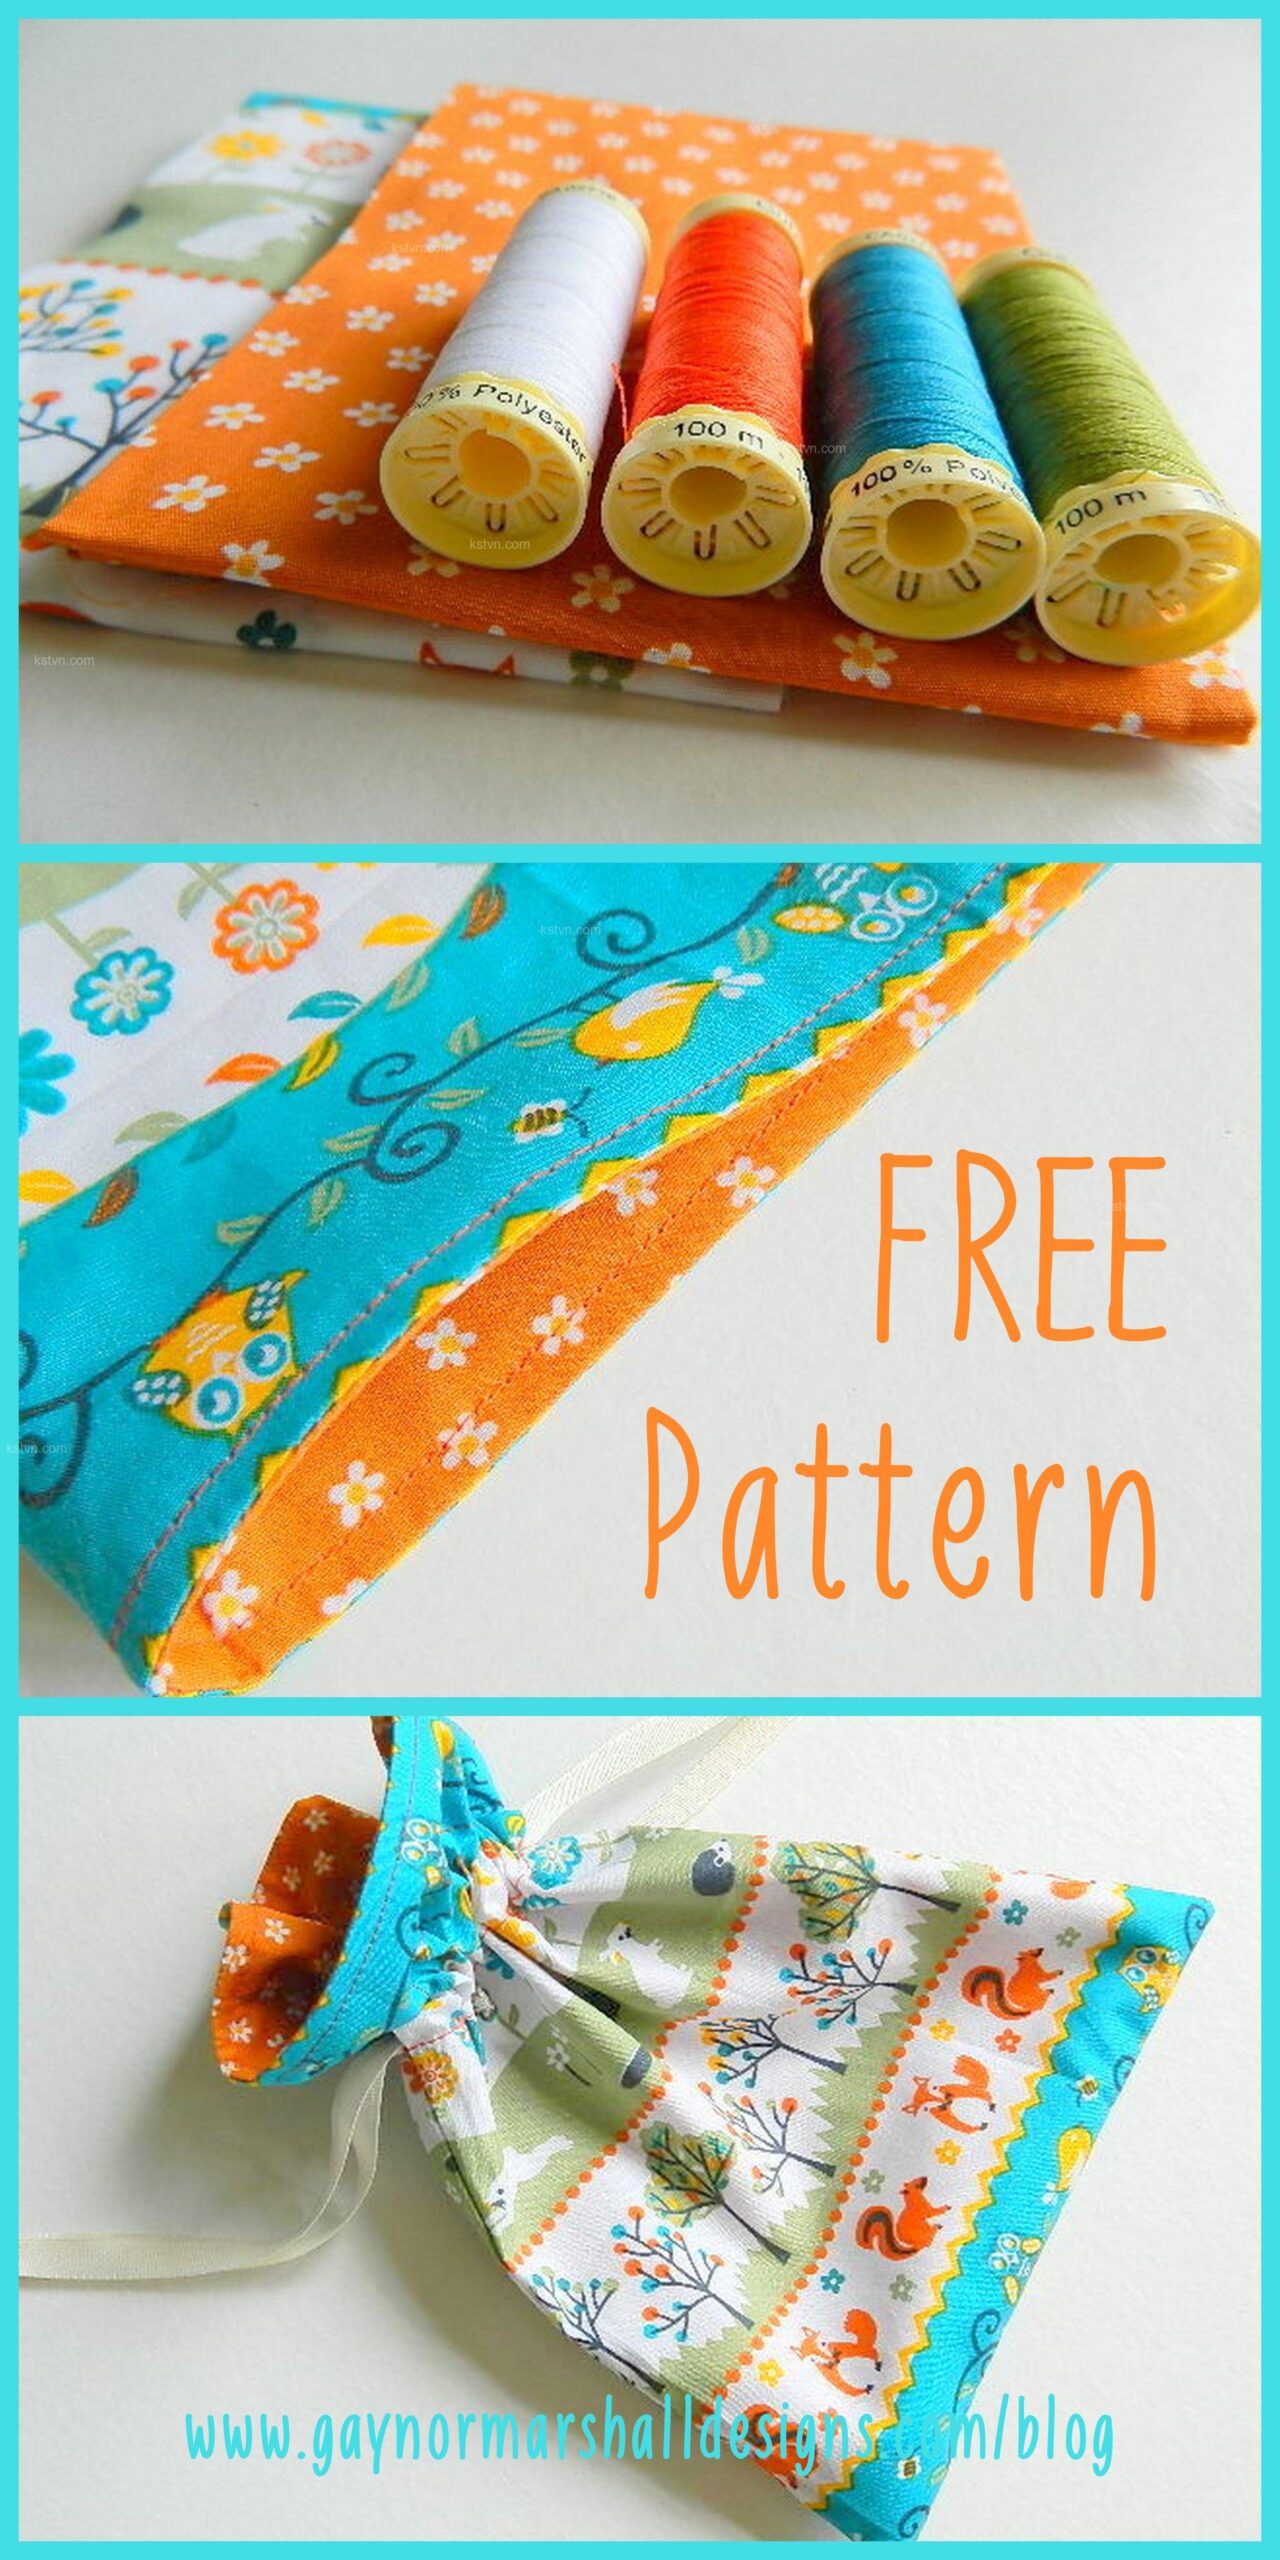 Tips for making your own drawstring bag with eyecatching colors